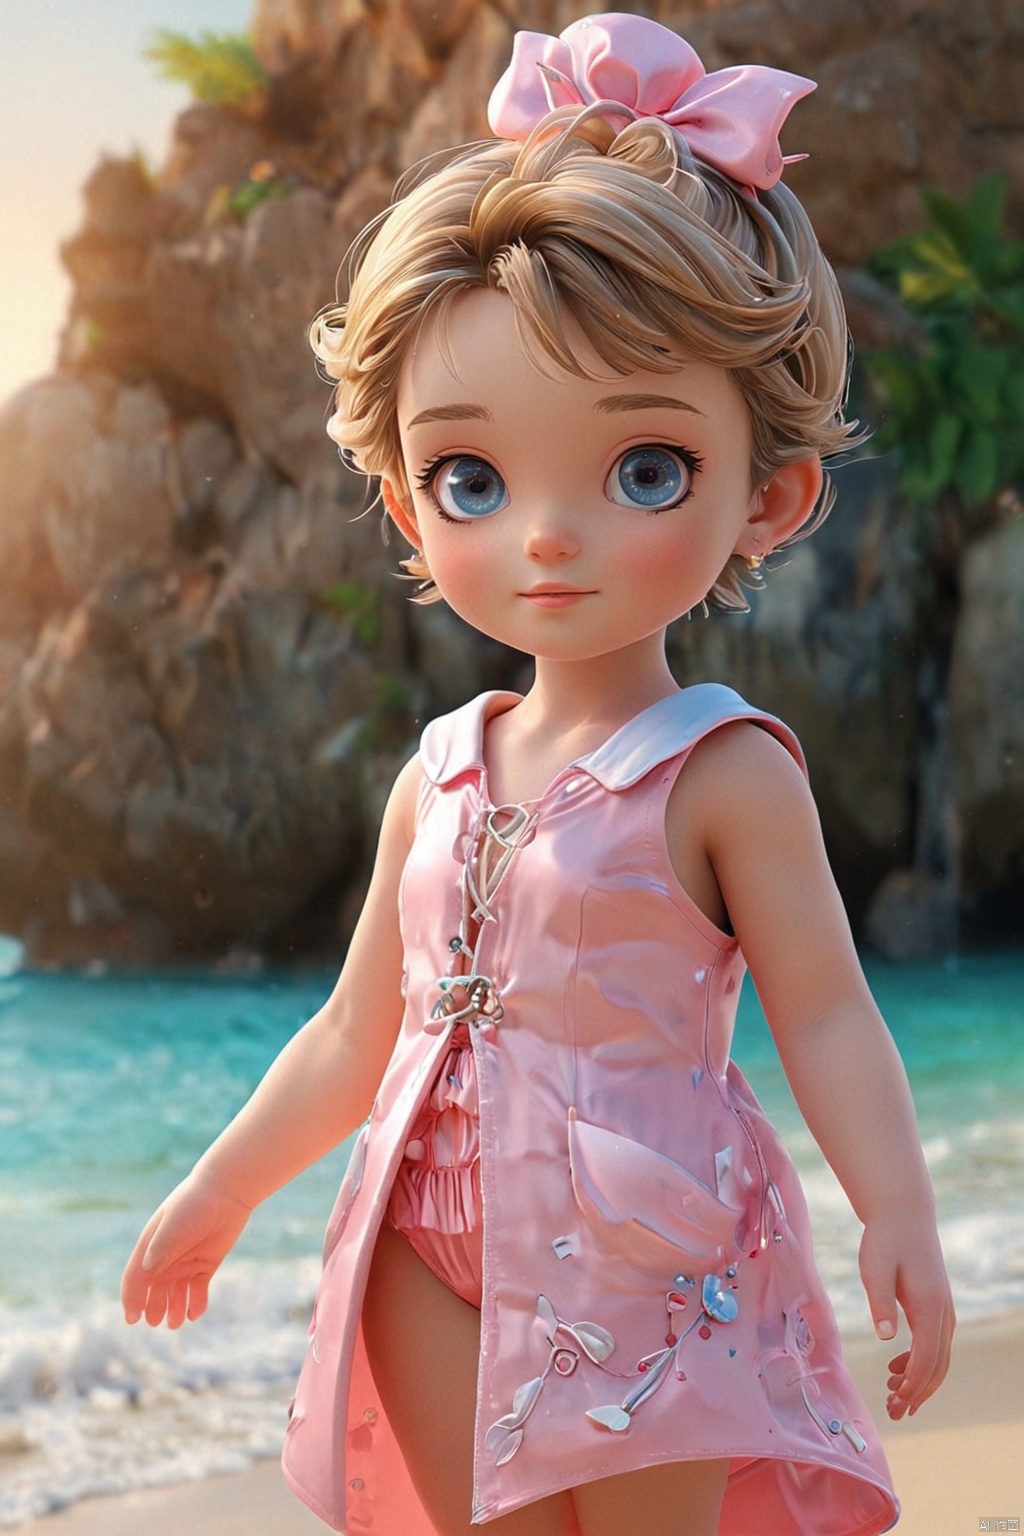  Cute little girl, pink pommel dress, soft and elastic, blue tail, dream beach,
1 gril,full body,
render,technology, (best quality) (masterpiece), (highly detailed), 4K,Official art, unit 8 k wallpaper, ultra detailed, masterpiece, best quality, extremely detailed,atmospheric,highdetail,exquisitefacialfeatures,futuristic,sciencefiction,CG, 3DIP